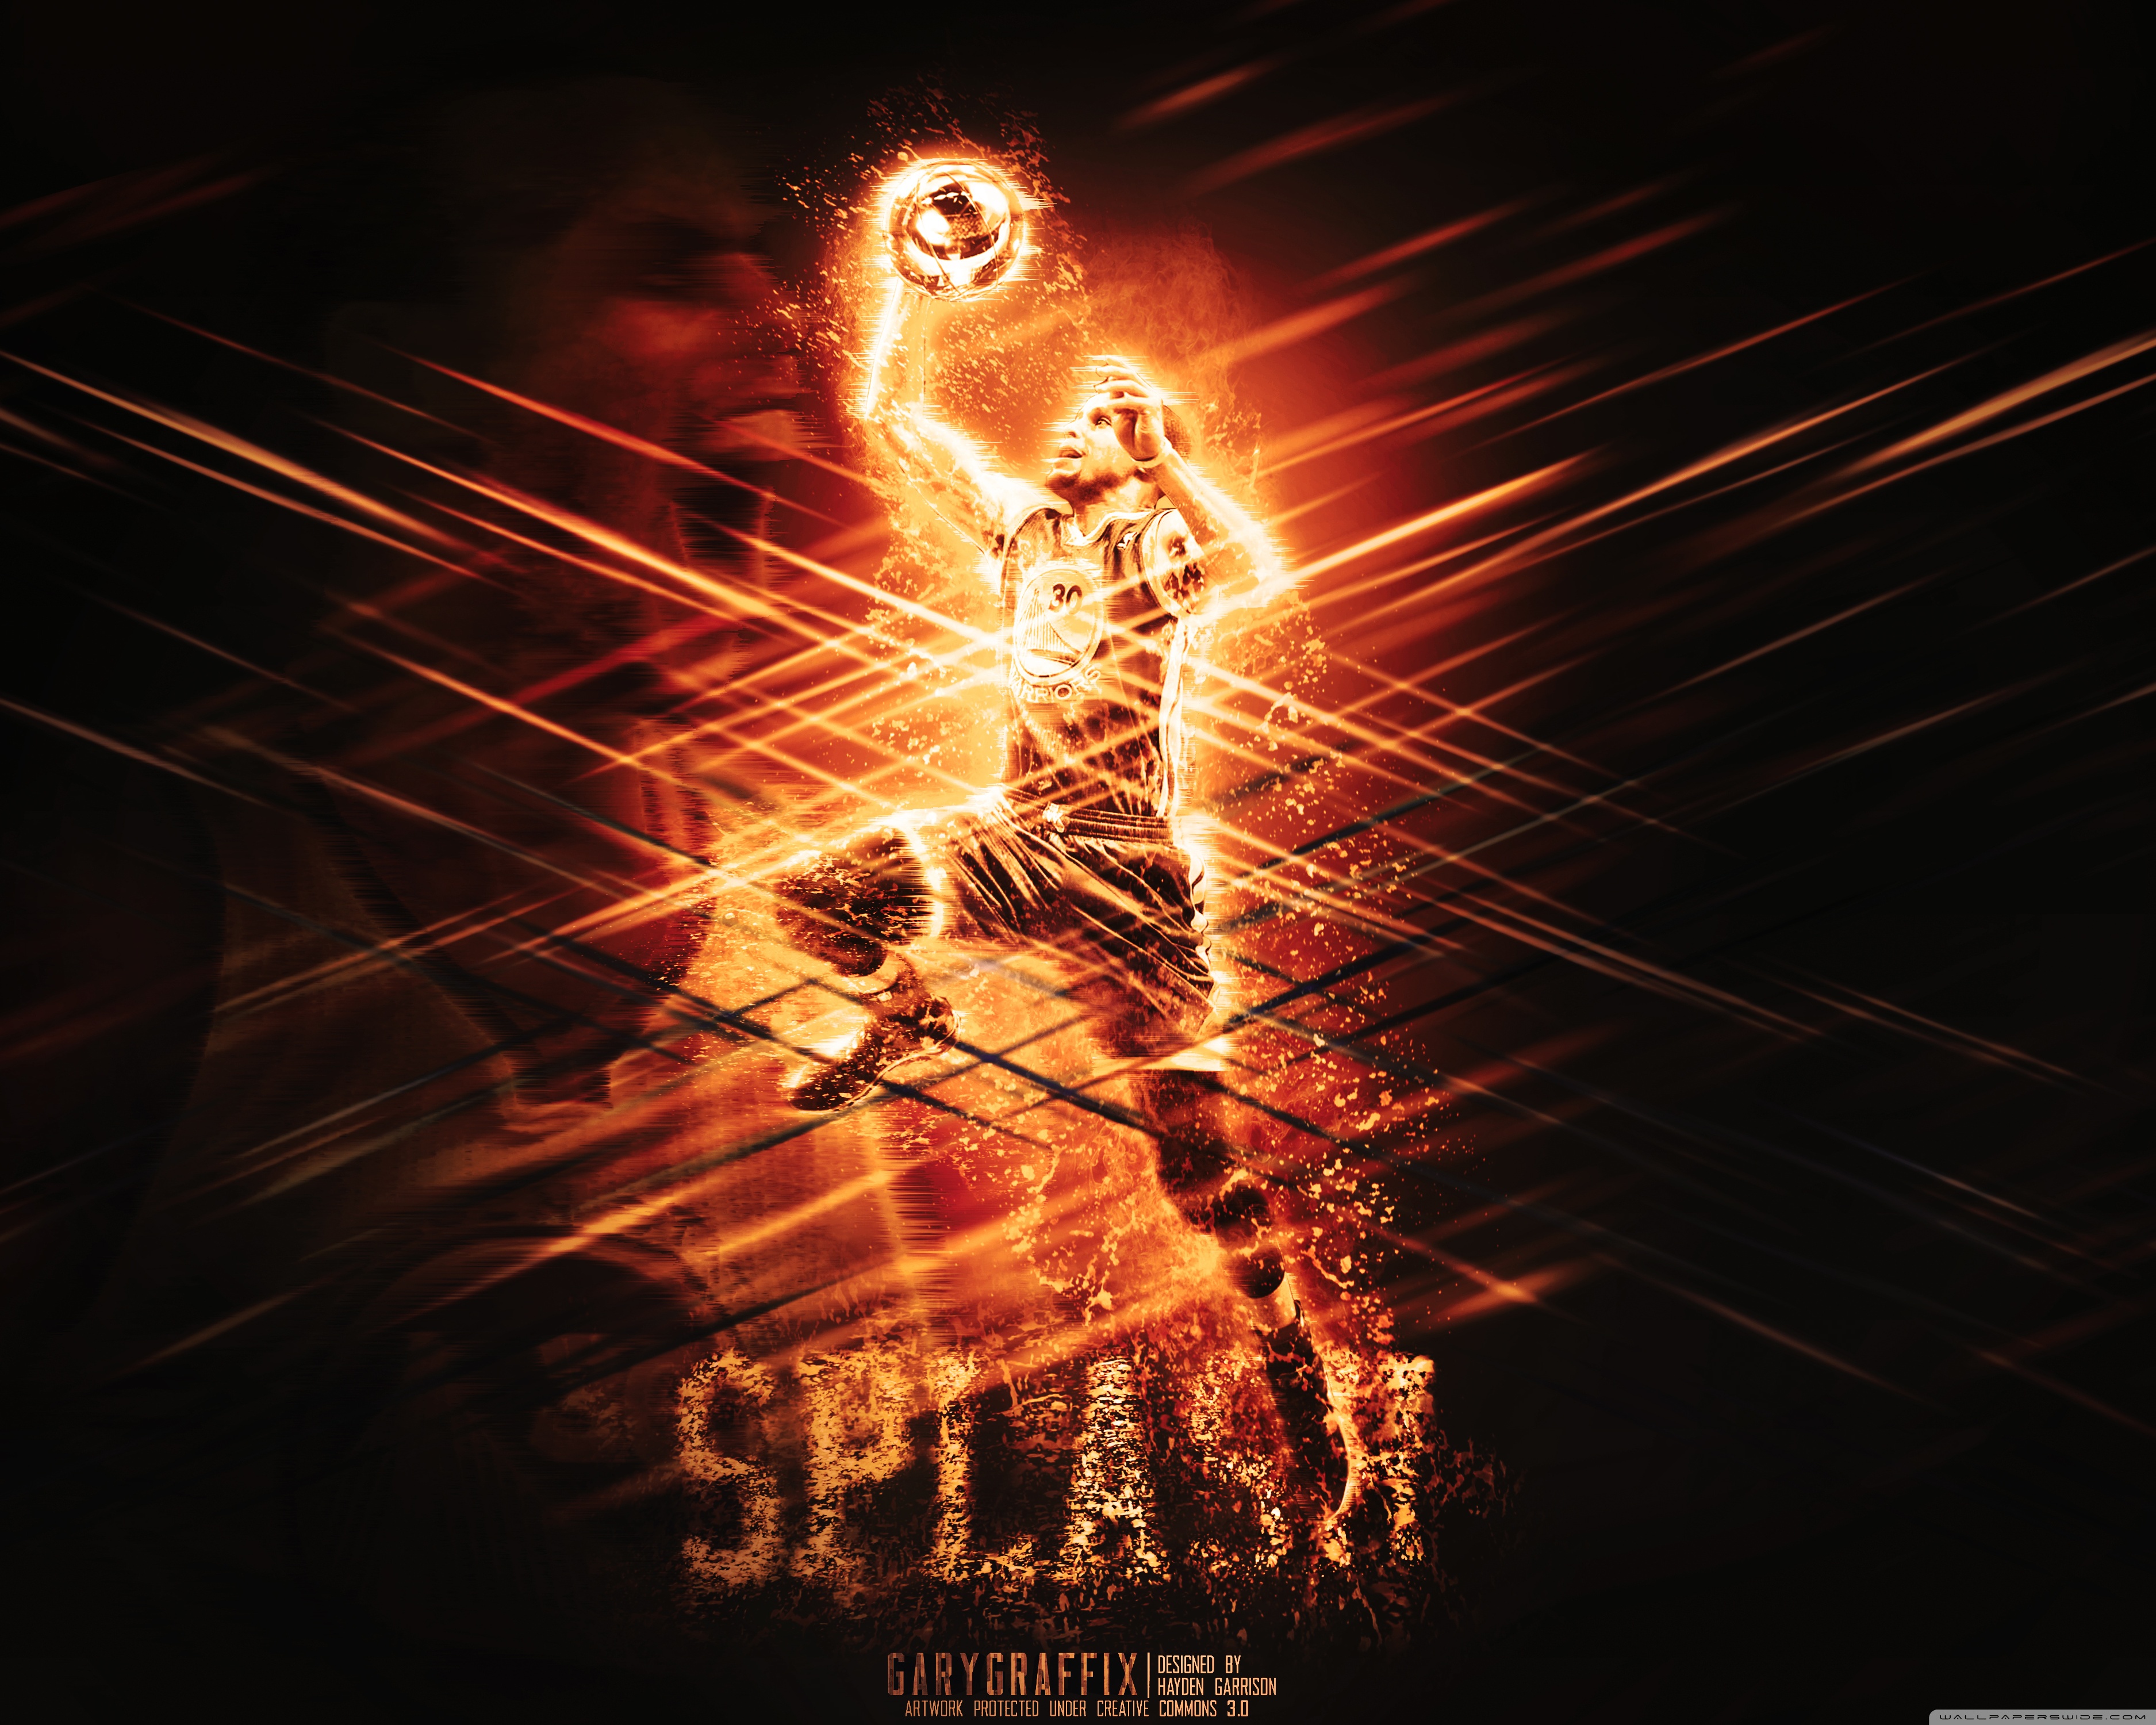 Download 21 wallpapers-of-stephen-curry The-Best-Stephen-Curry-Wallpaper-Steph-Curry,-Hd-.jpg